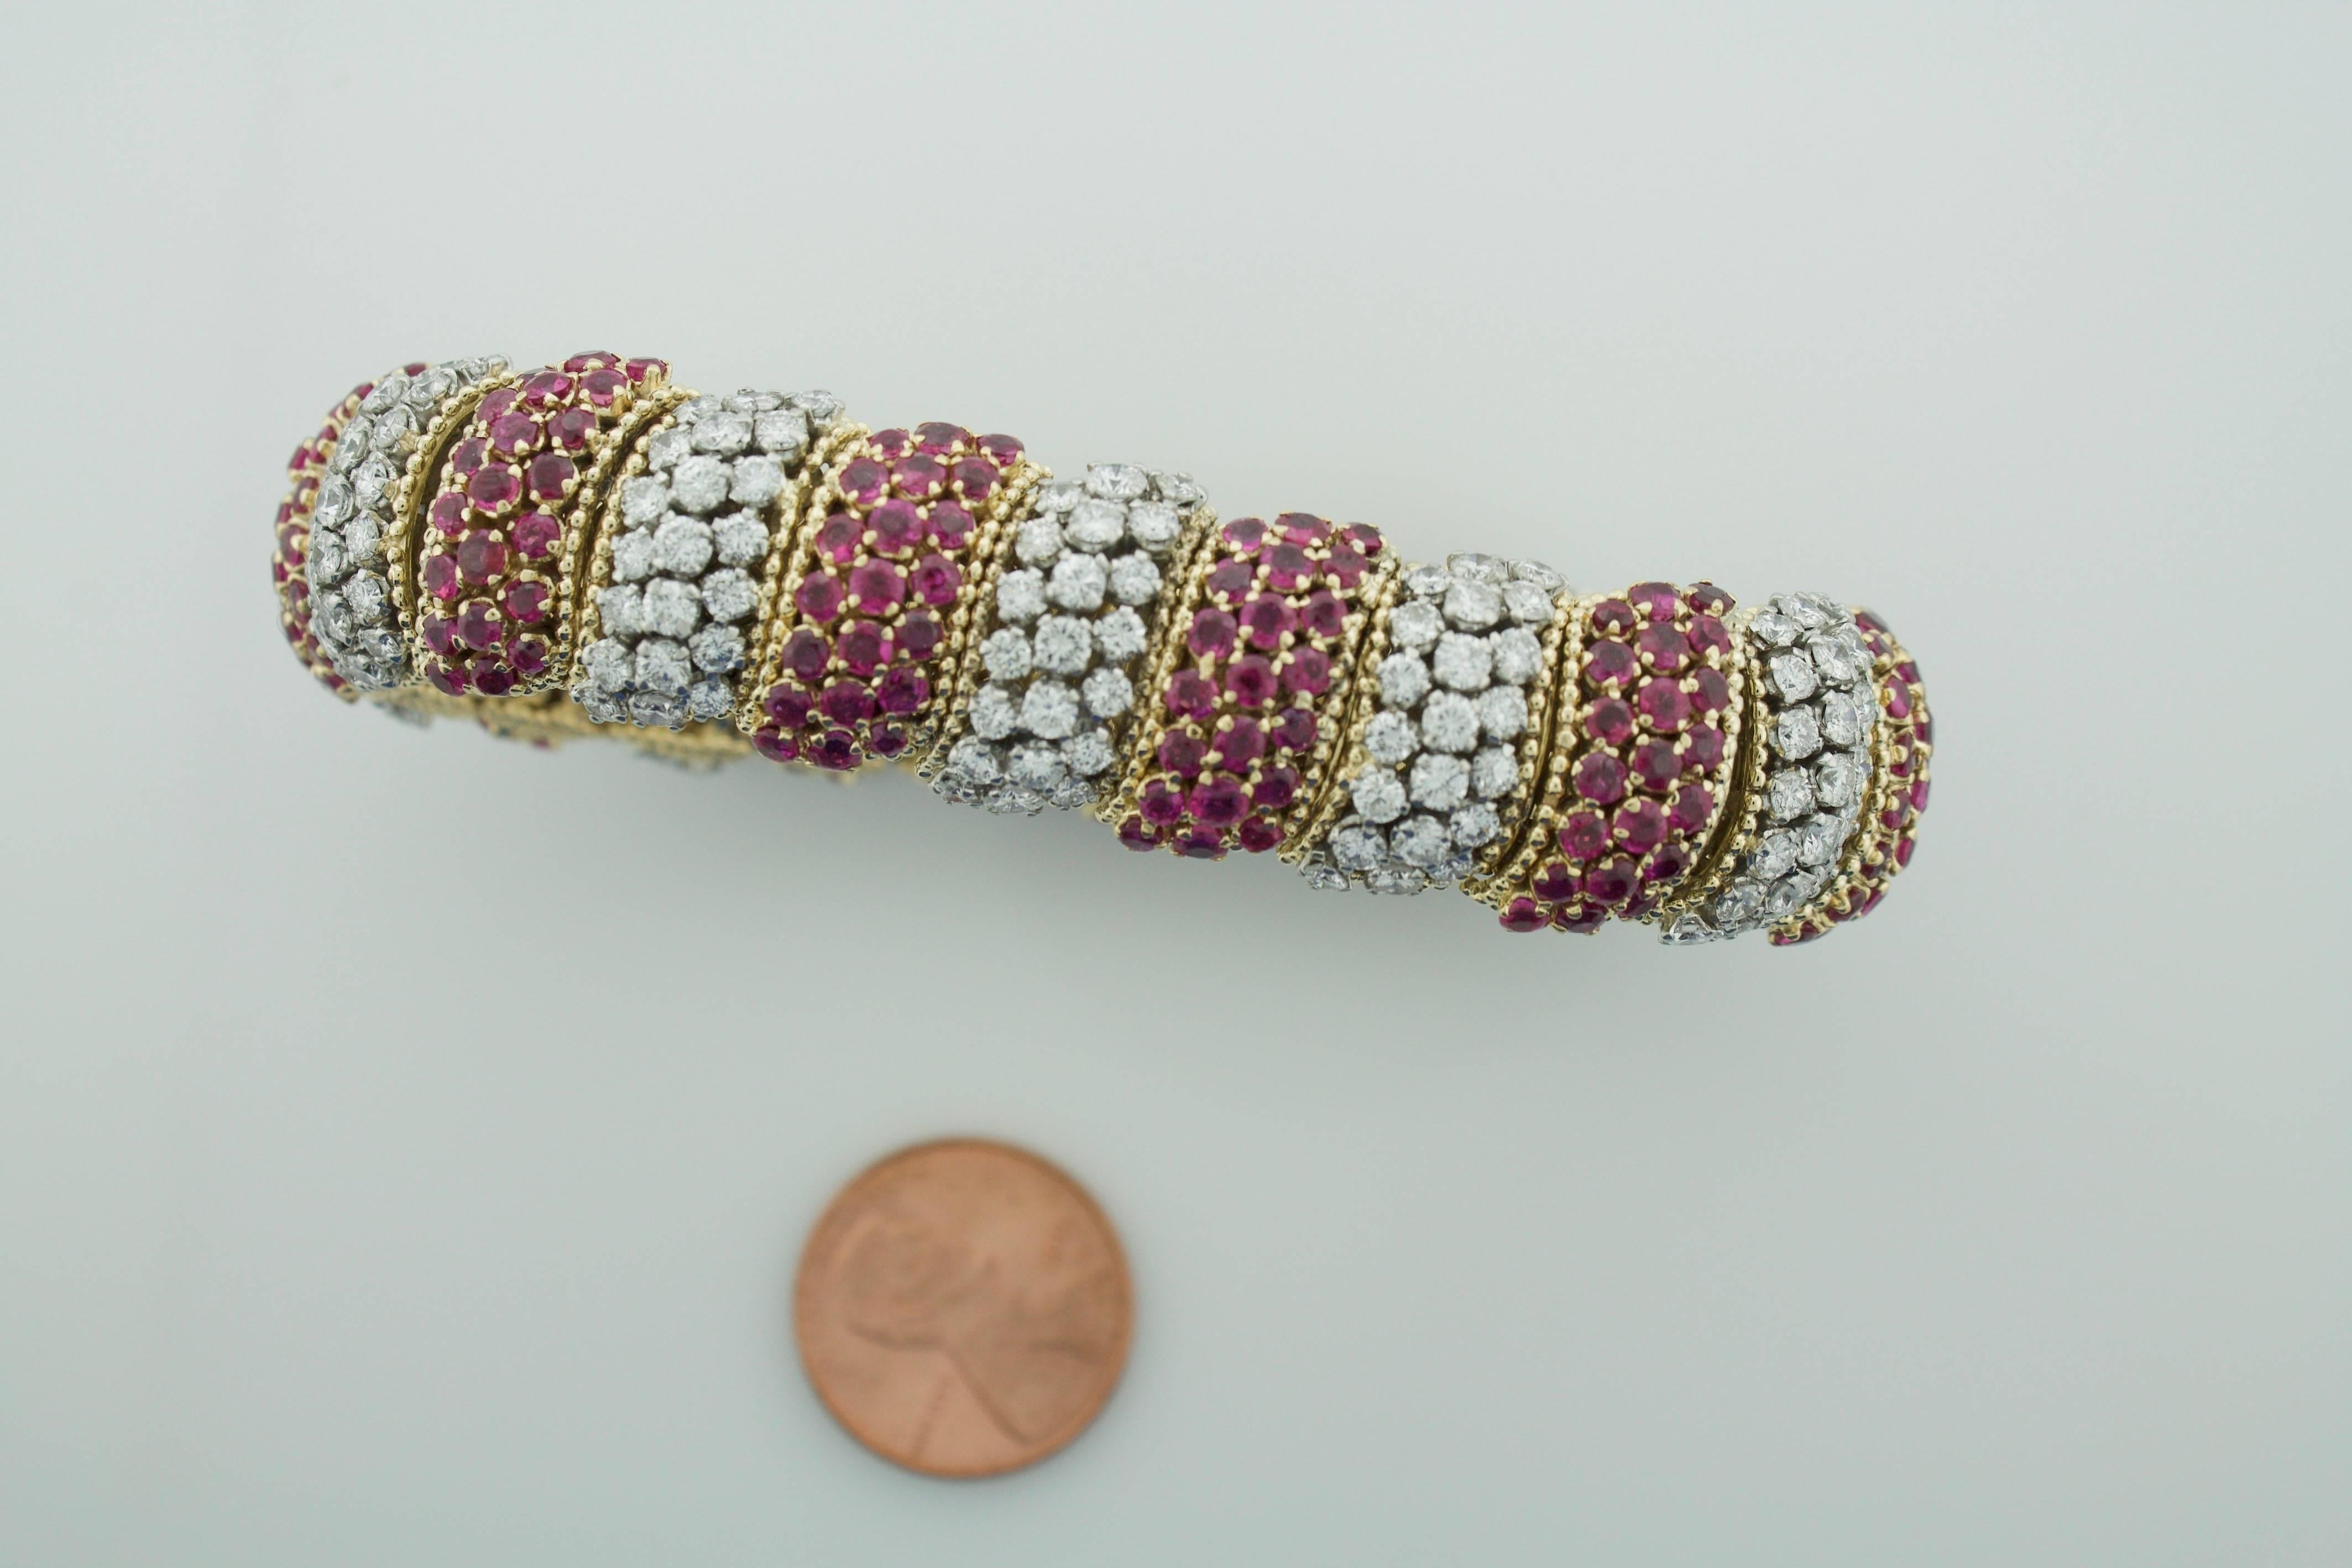 Tiffany and Company 18k Yellow Gold Diamond and Ruby Bracelet circa 1950's
231 Round Brilliant Cut Diamonds Weighing 10.40 carats (approximately)
231 Round Rubies Weighing 12.50 carats (approximately)
Engraved: Tiffany & Co. ITALY 18k 750